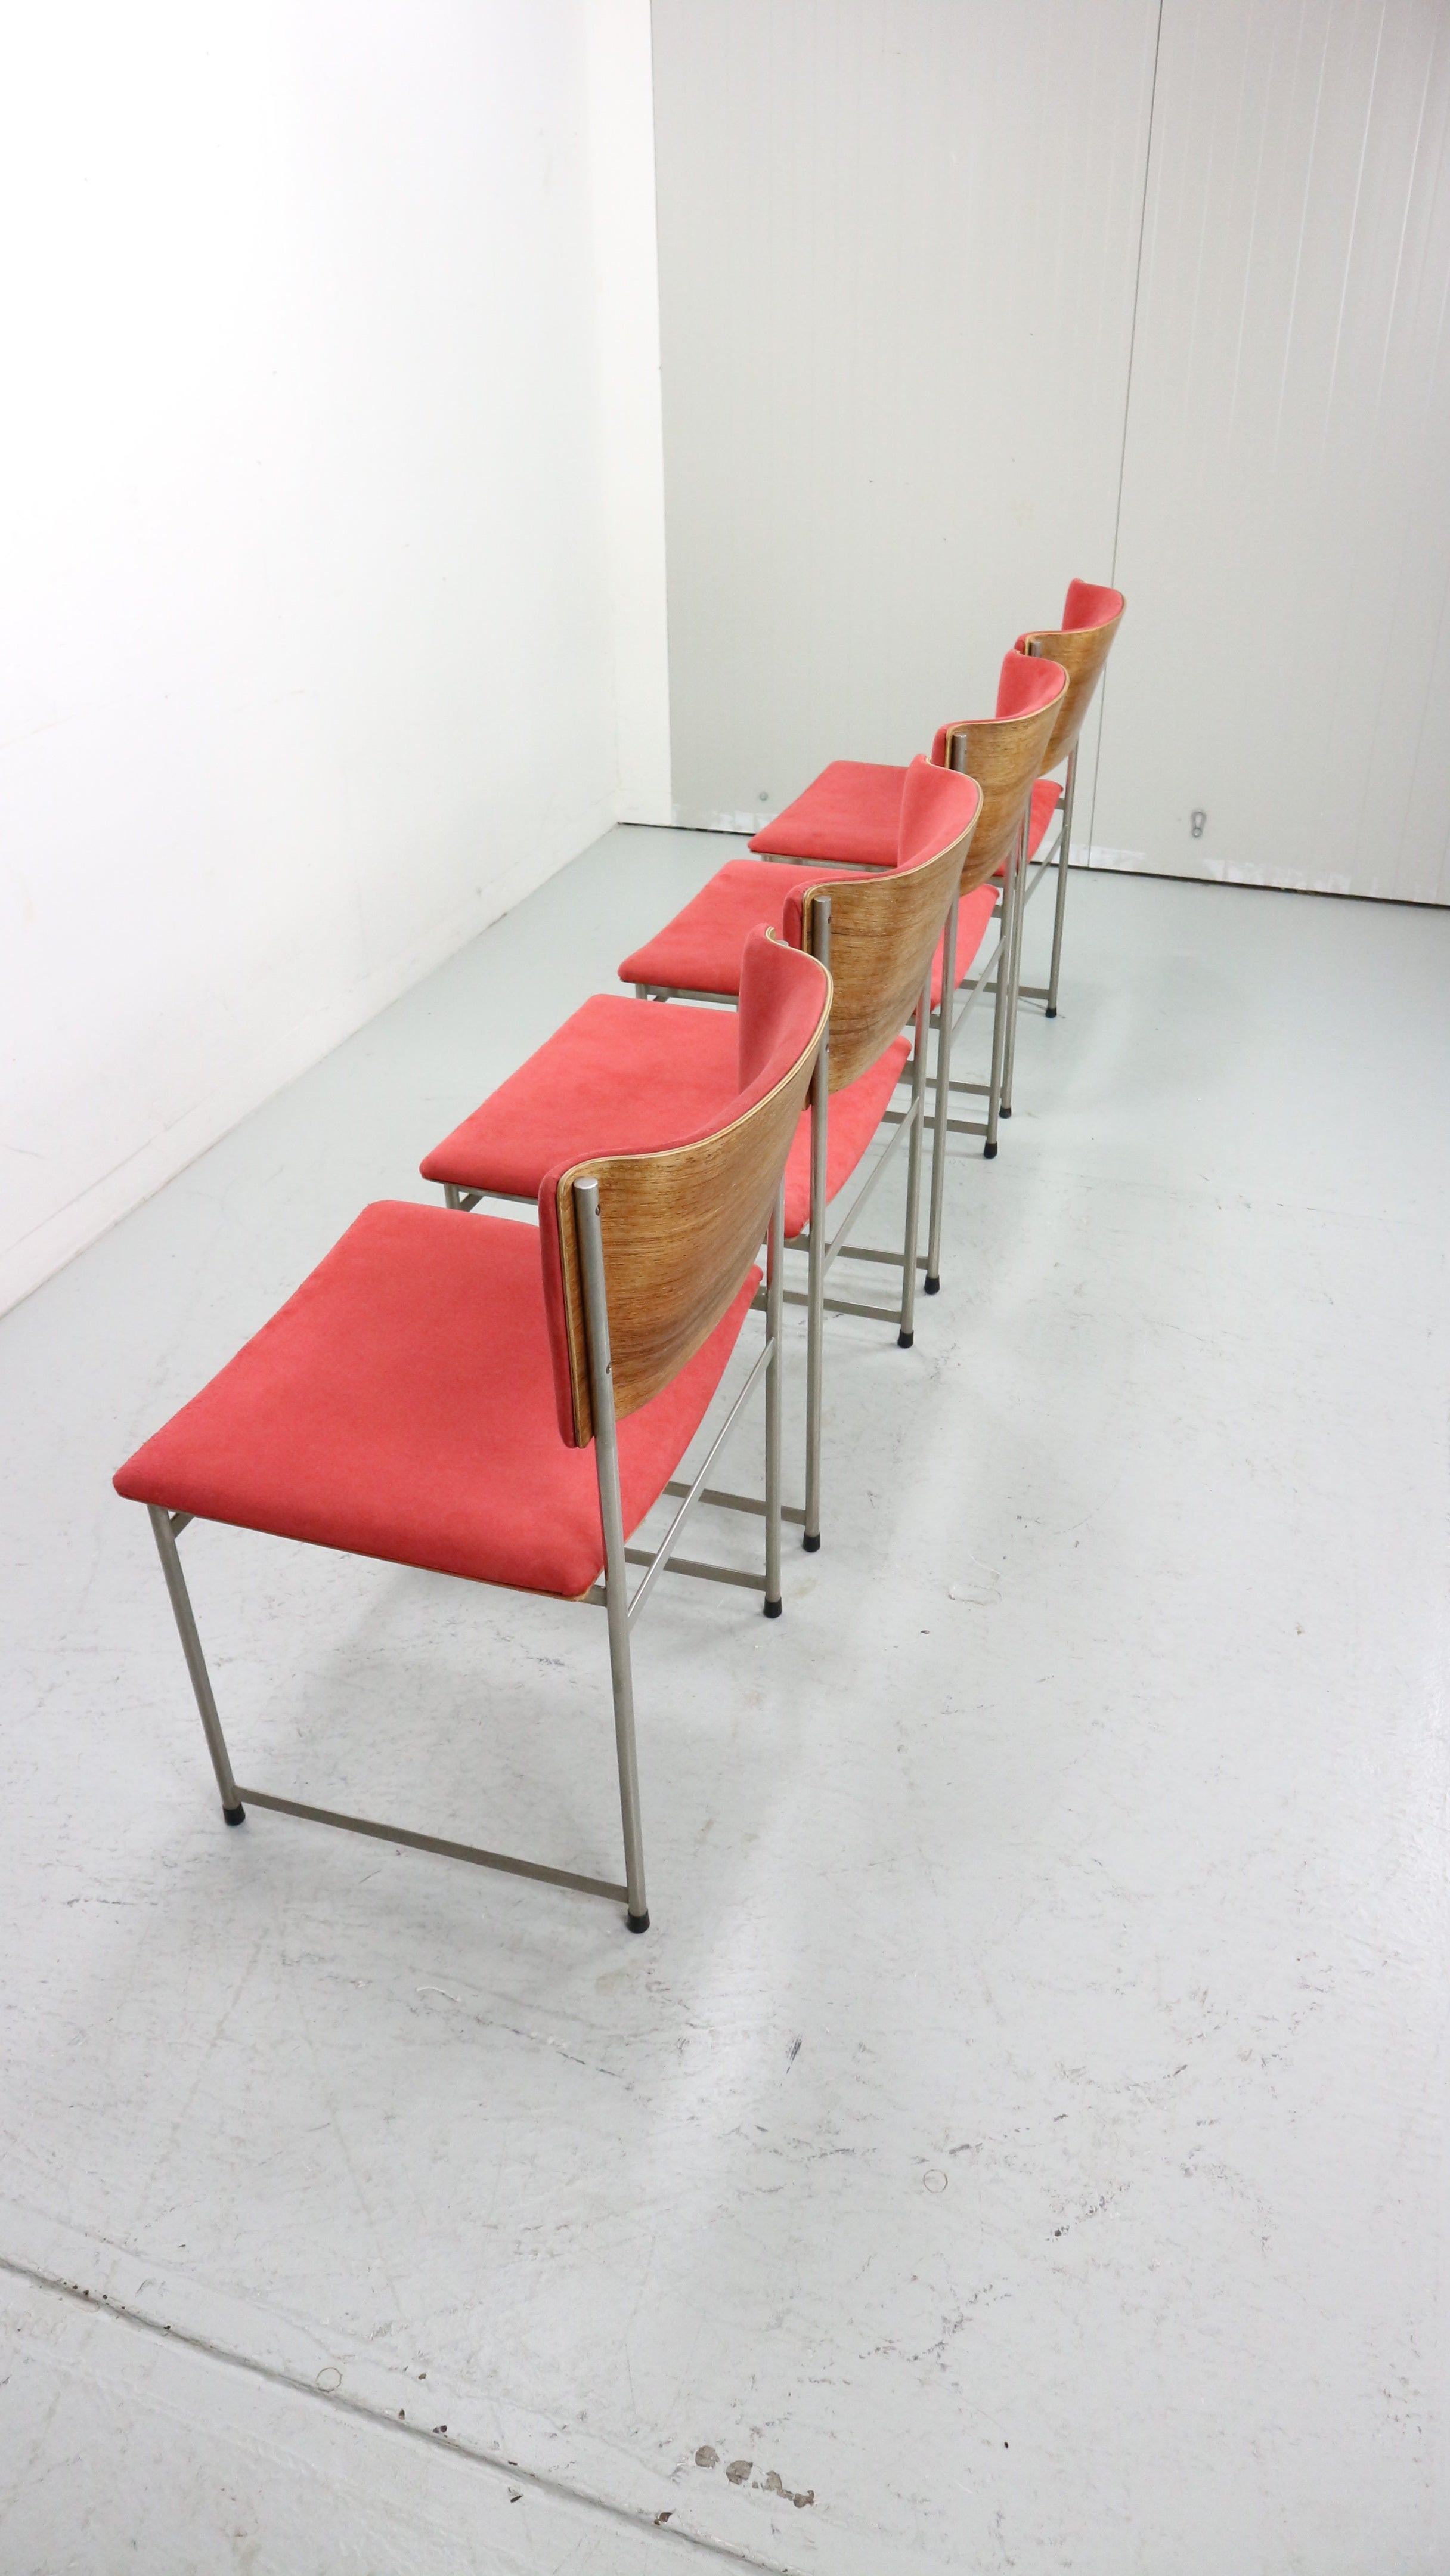 Set of 4 SM08 dining chairs by Cees Braakman for Pastoe, Netherlands 1960s